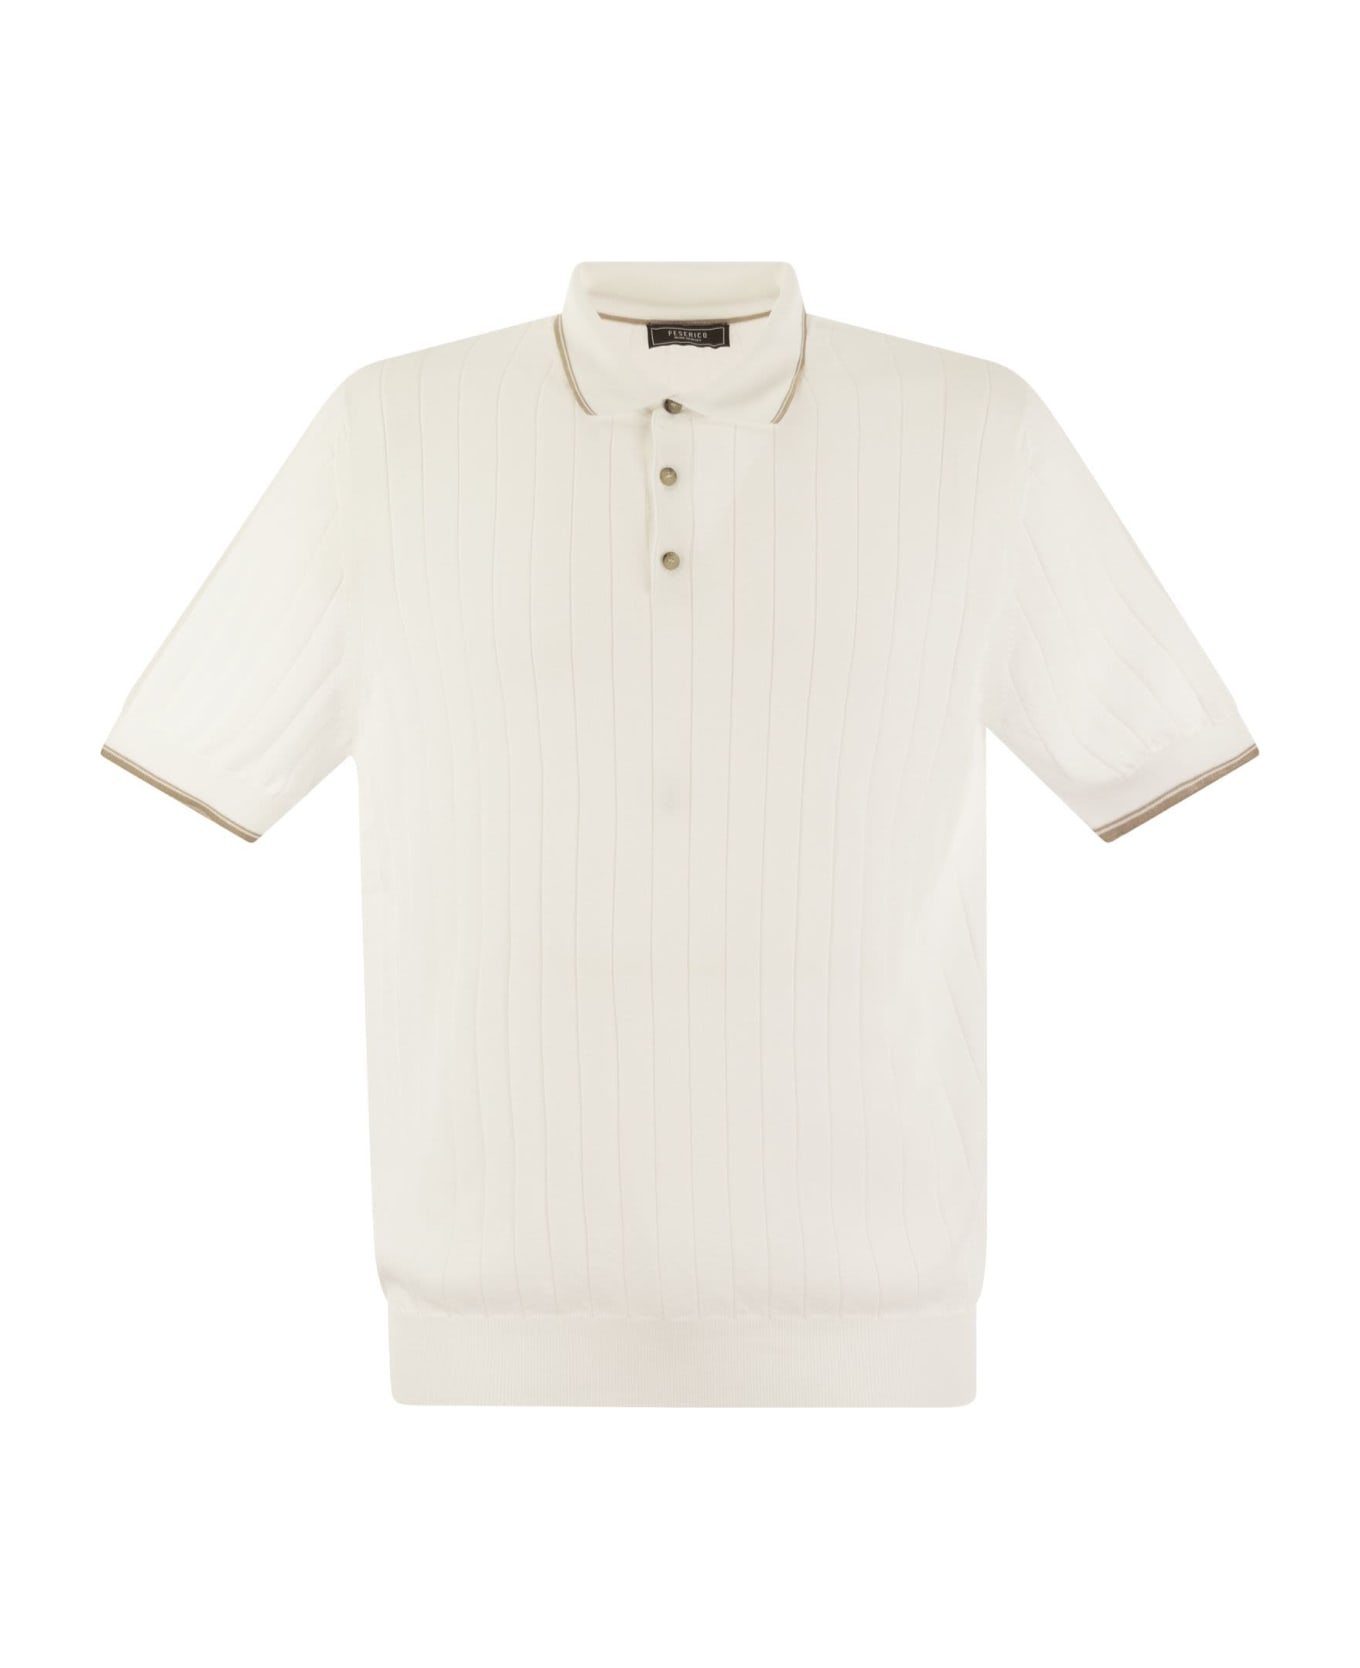 Peserico Polo Shirt In Pure Cotton Crepe Yarn With Flat Rib - White/beige